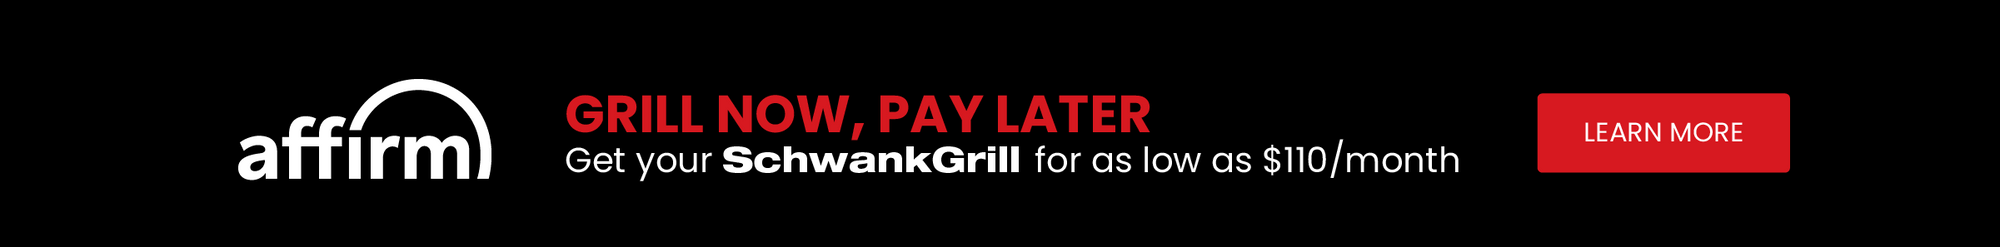 Affirm Banner - Grill Now, Pay Later